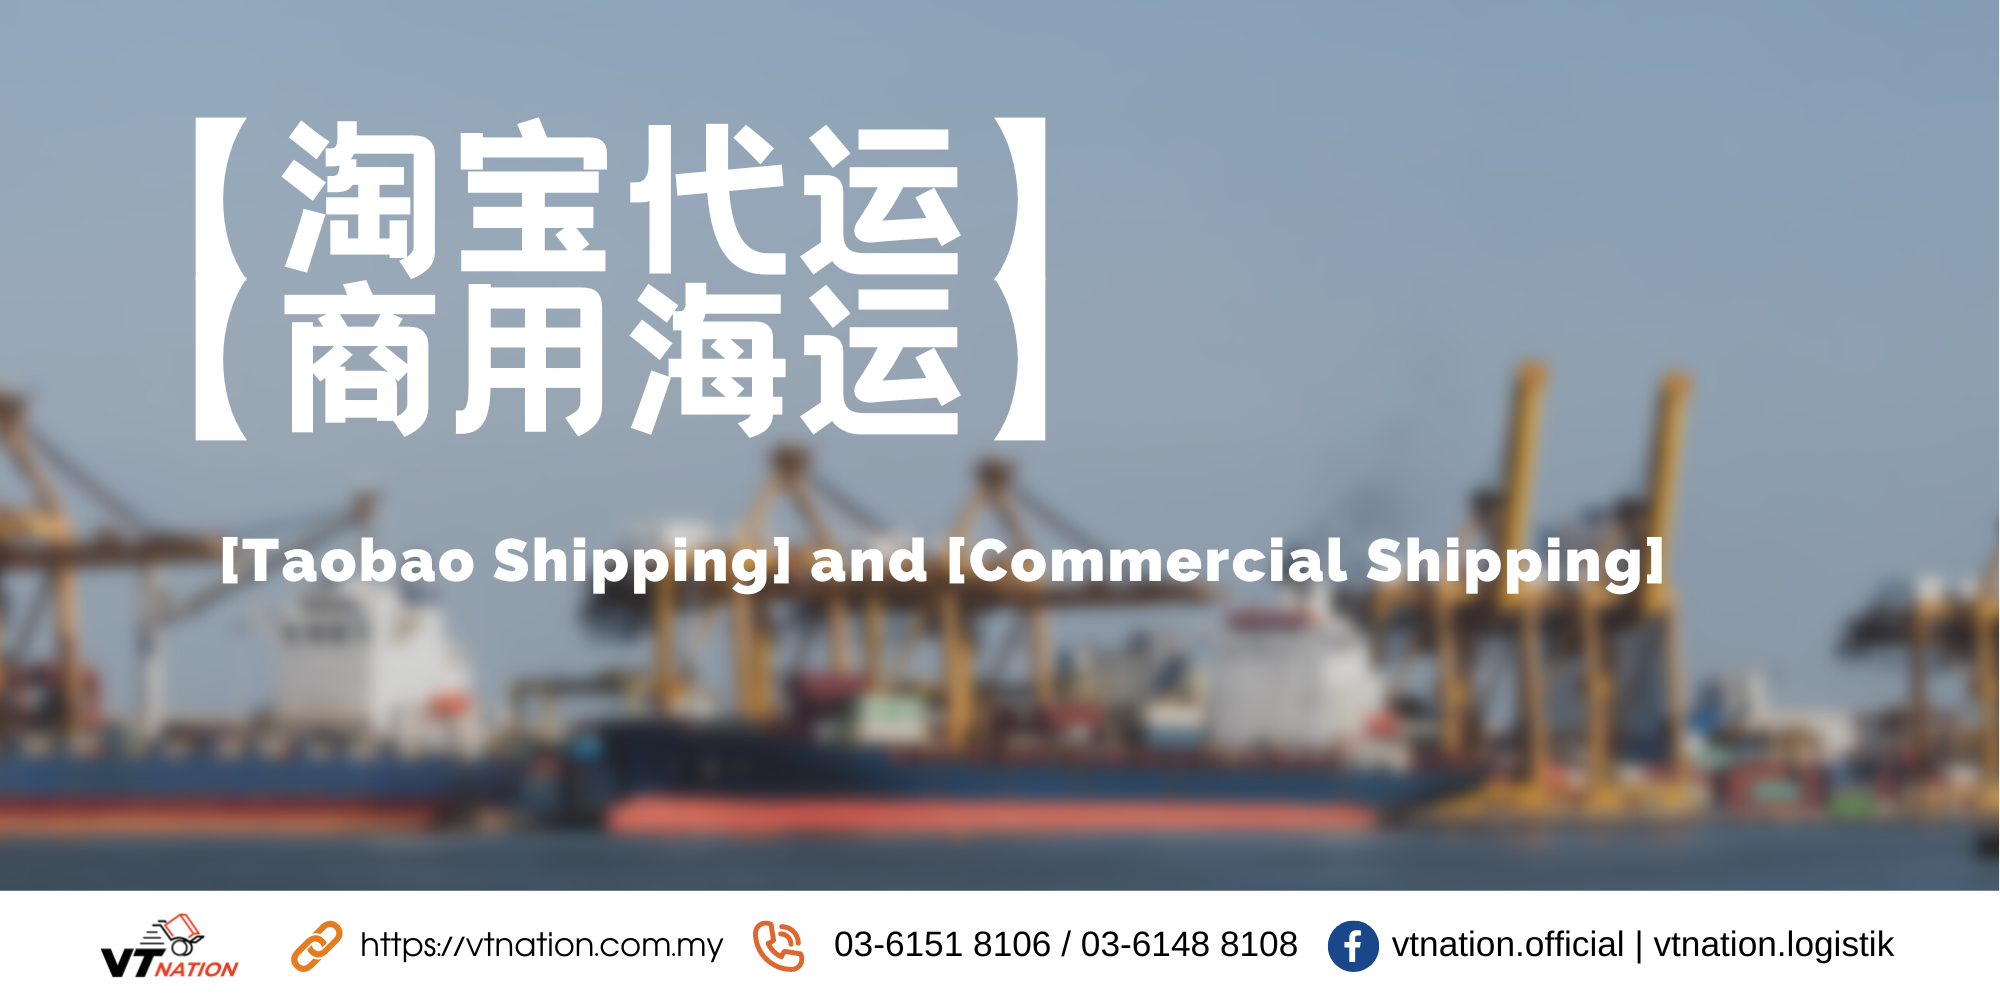 [Taobao Shipping] and [Commercial Shipping]